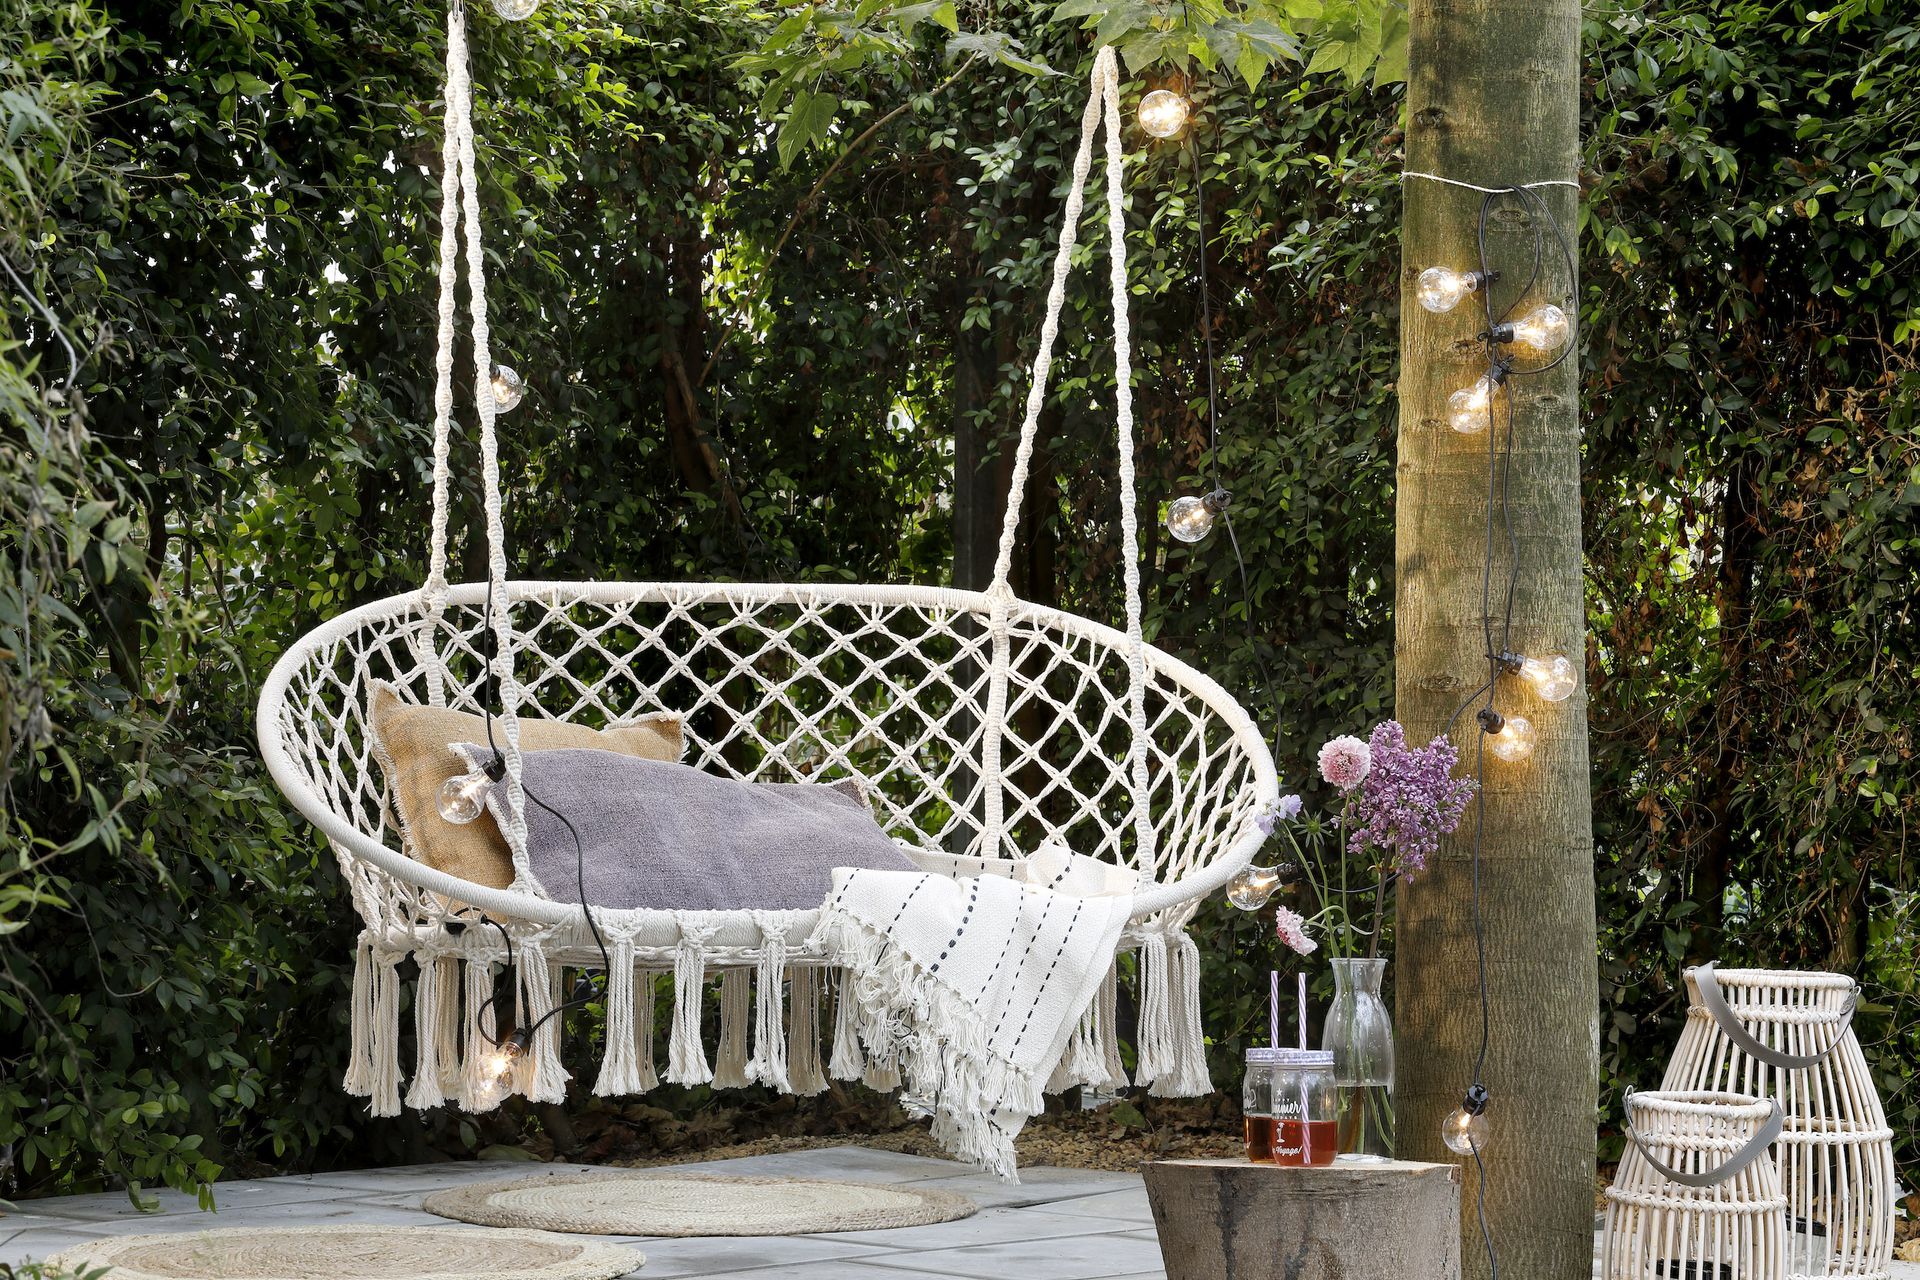 <p>                     Perfect for parties, garden swing seats is just the thing for catching up with a friend over a glass of something chilled. This one is made of on-trend macramé and we love the tassel trim, which adds just the right touch of boho.                   </p>                                      <p>                     Style it up with some cushions and a throw in case it gets chilly later.                   </p>